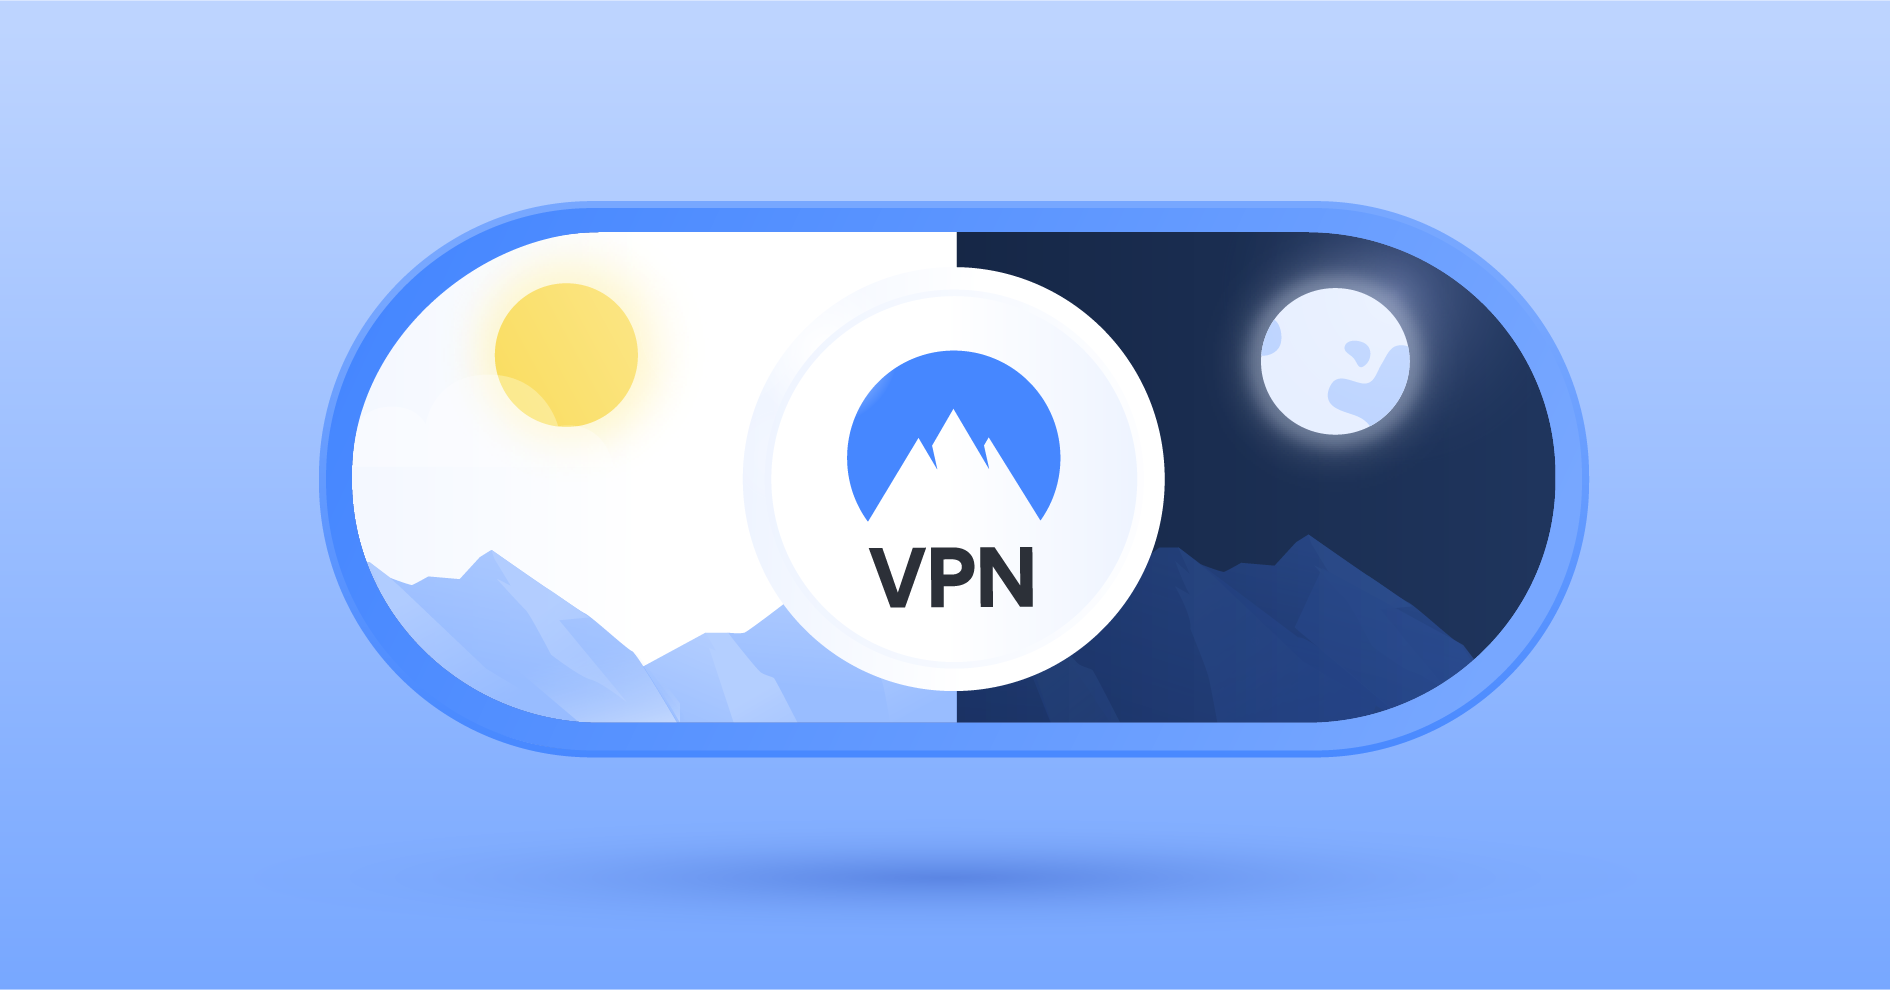 Should I leave my VPN on all the time? Yes, and here are 9 reasons why